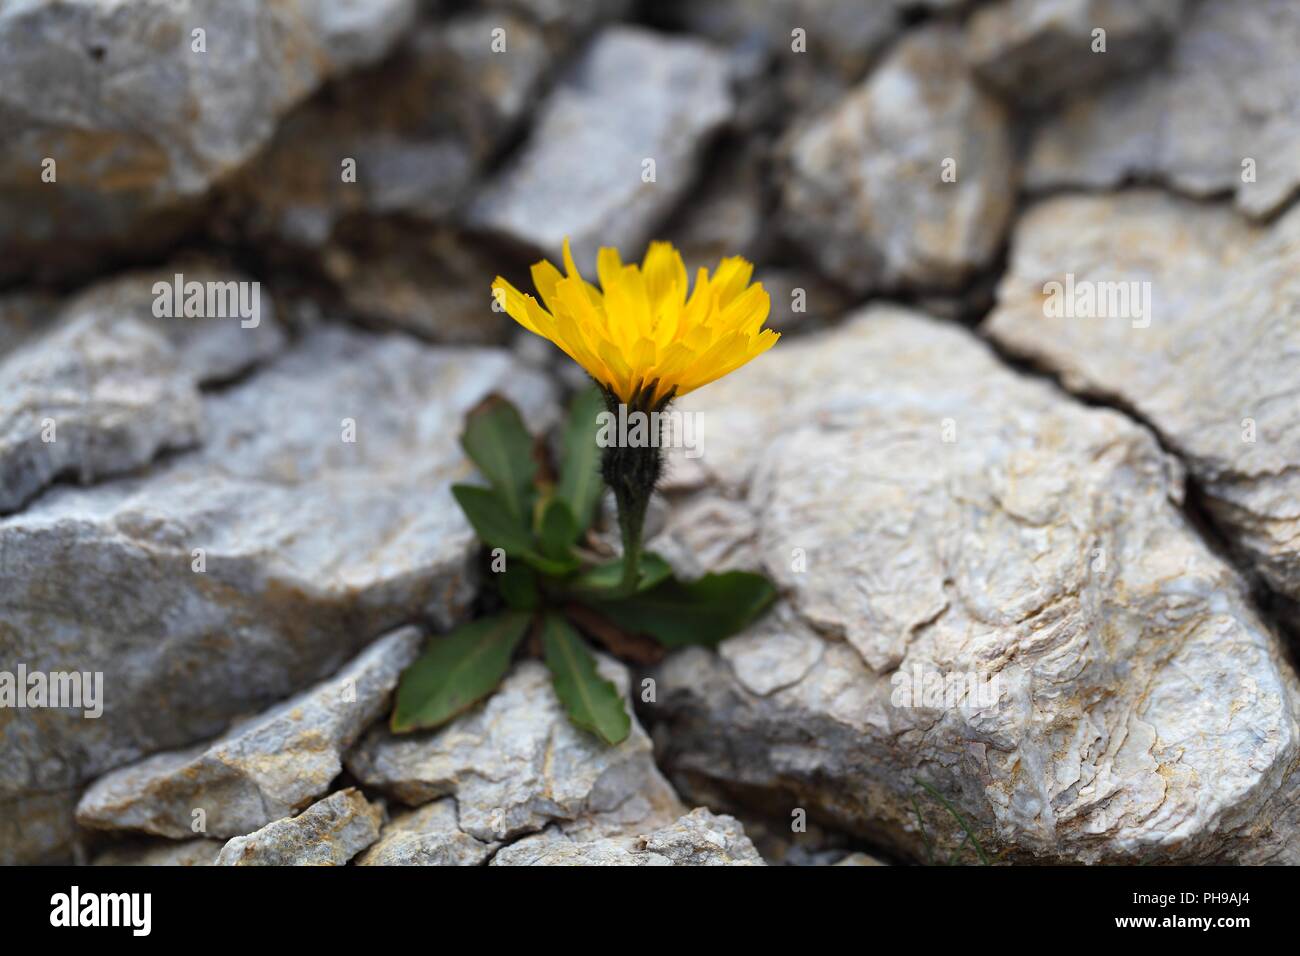 Flower of the hawksbeard (Crepis jacquinii) in the Bavarian Alps. Stock Photo